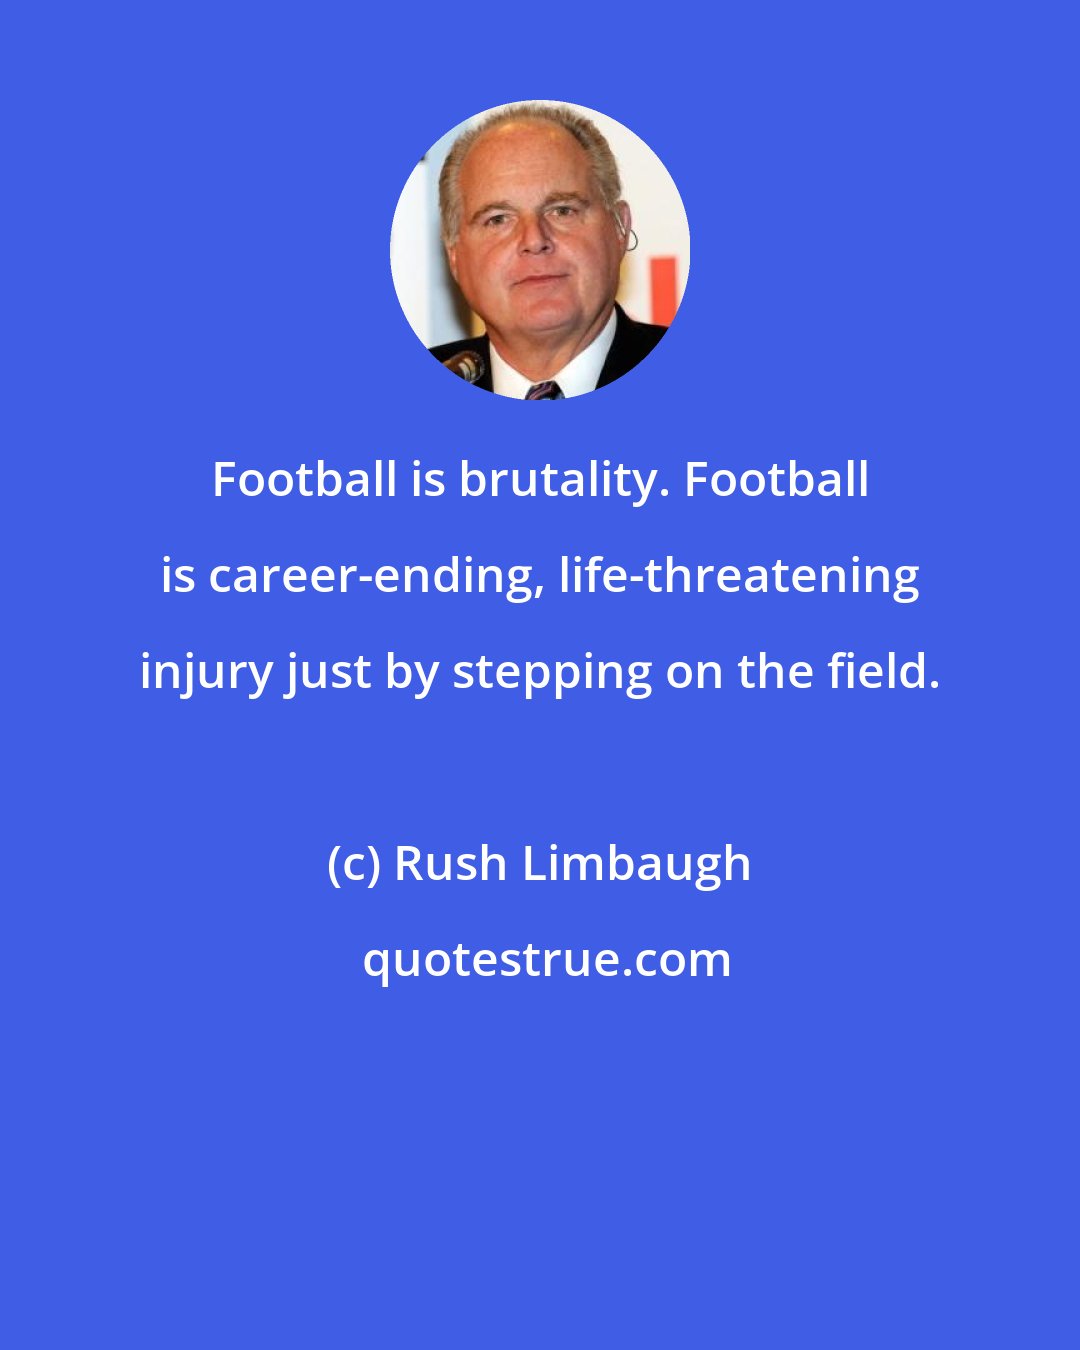 Rush Limbaugh: Football is brutality. Football is career-ending, life-threatening injury just by stepping on the field.